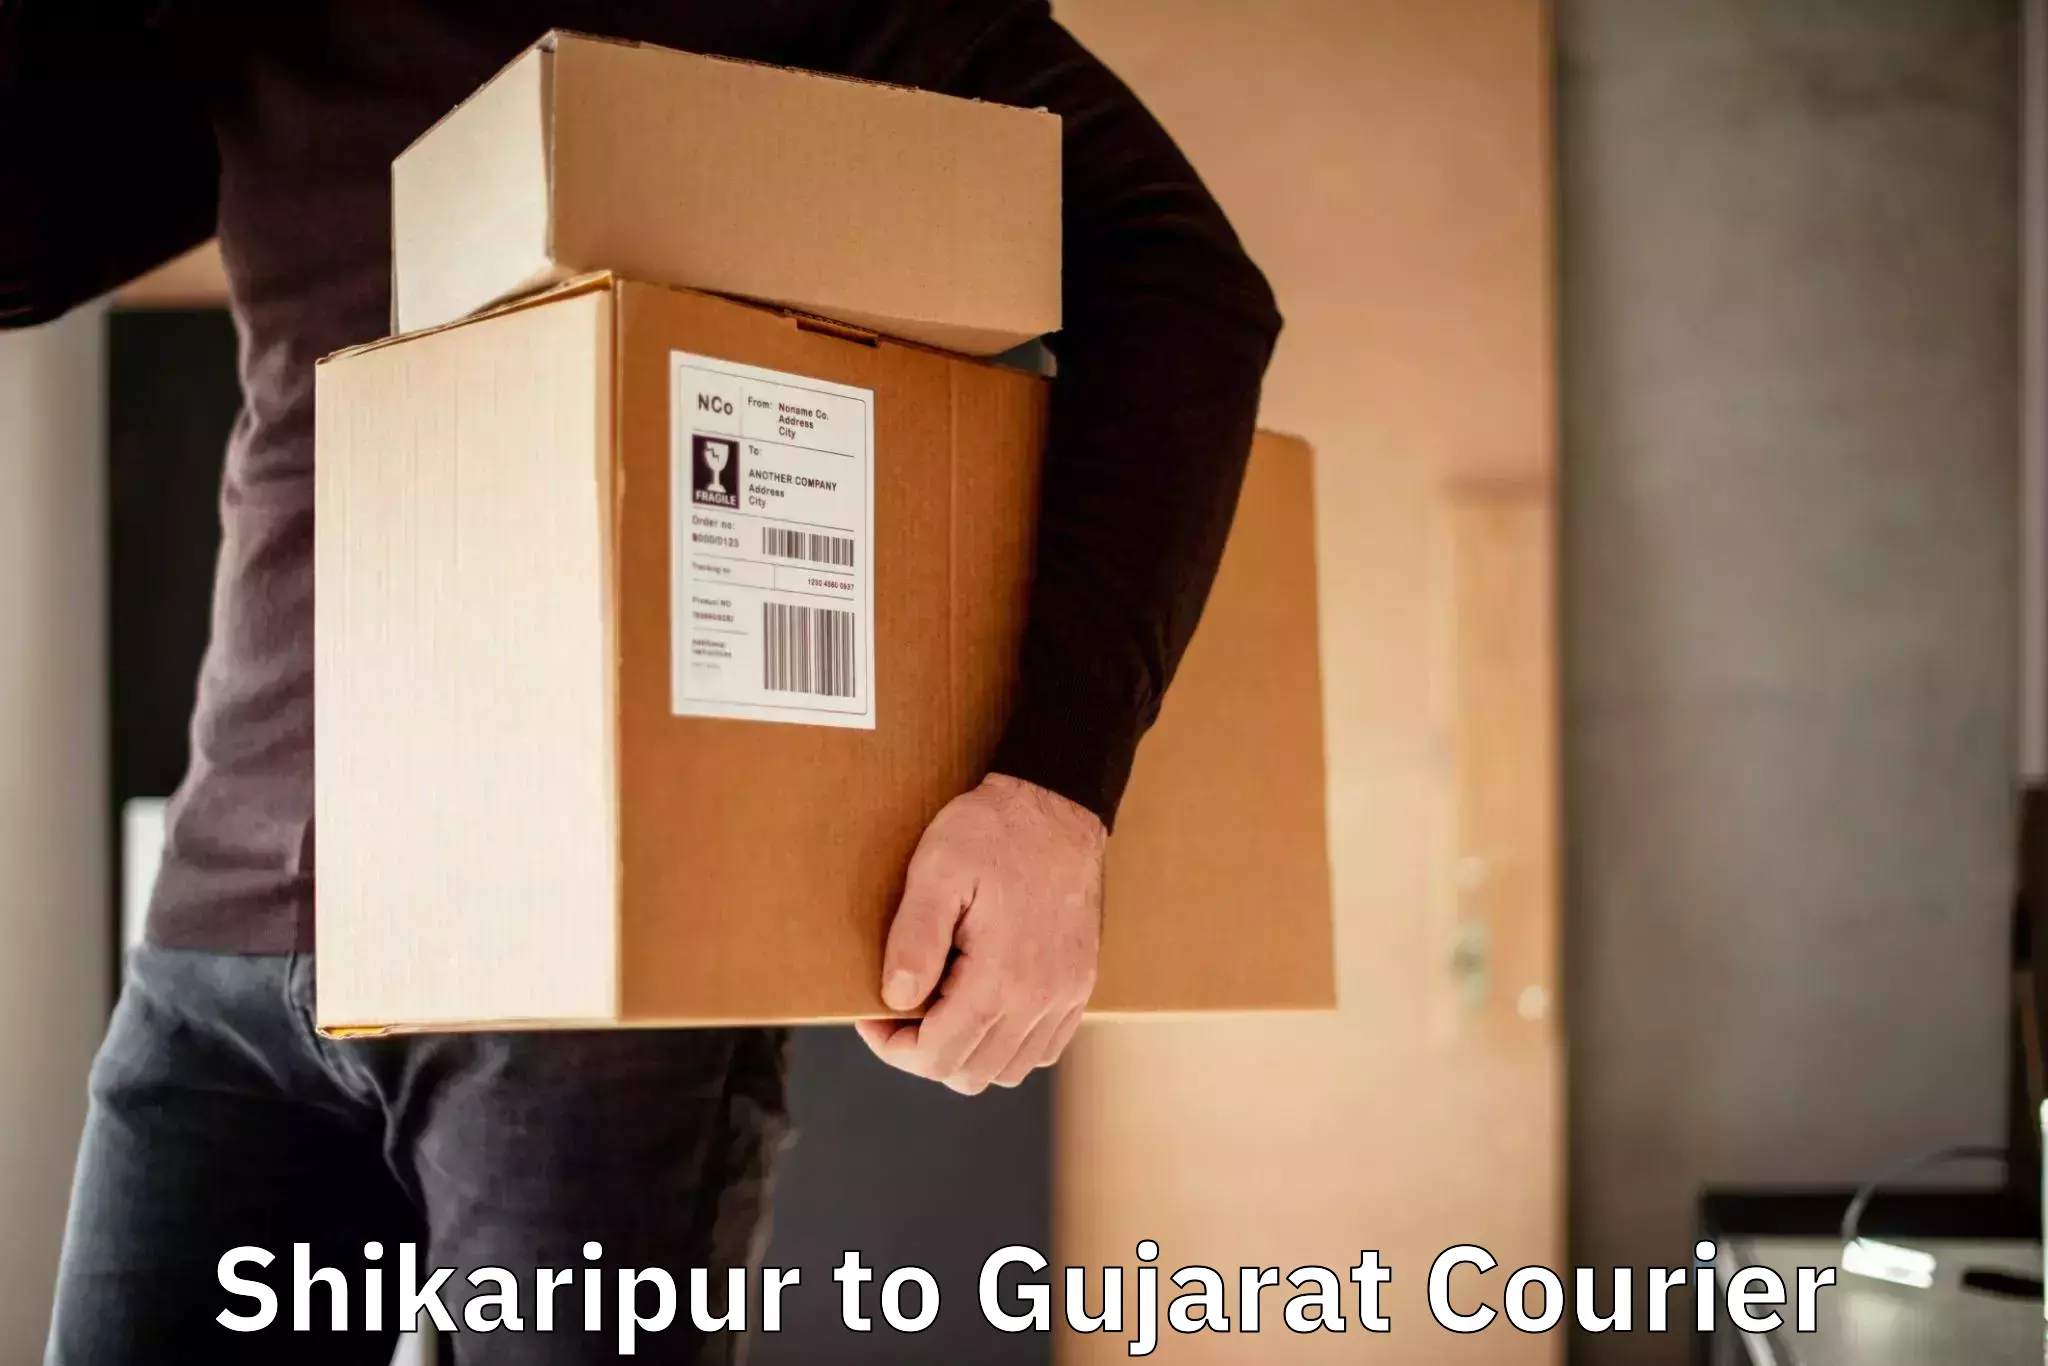 Professional courier services in Shikaripur to Gujarat